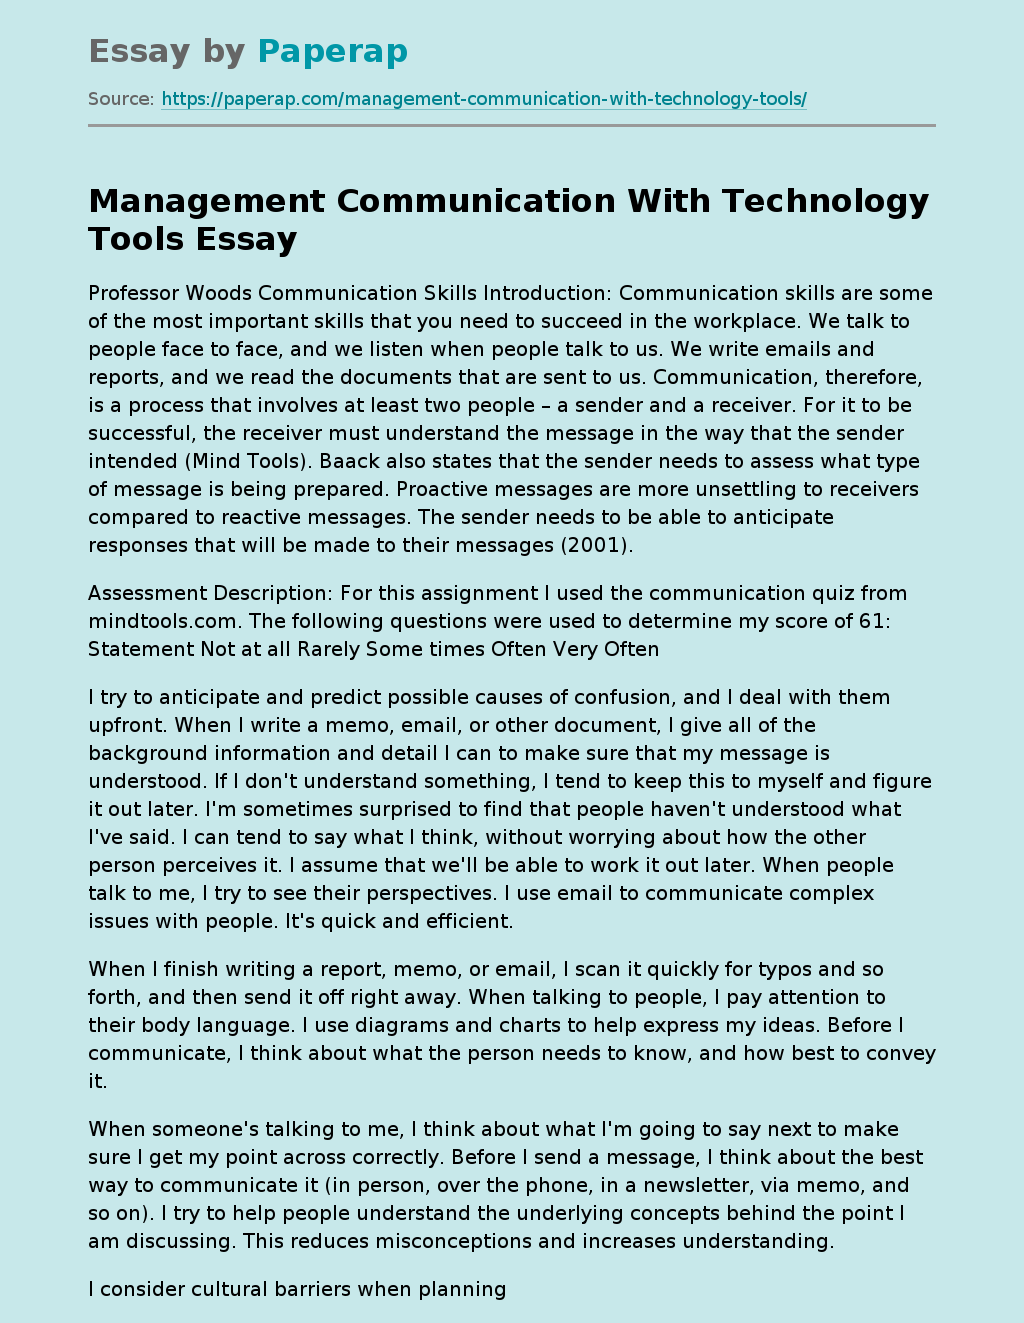 Management Communication With Technology Tools